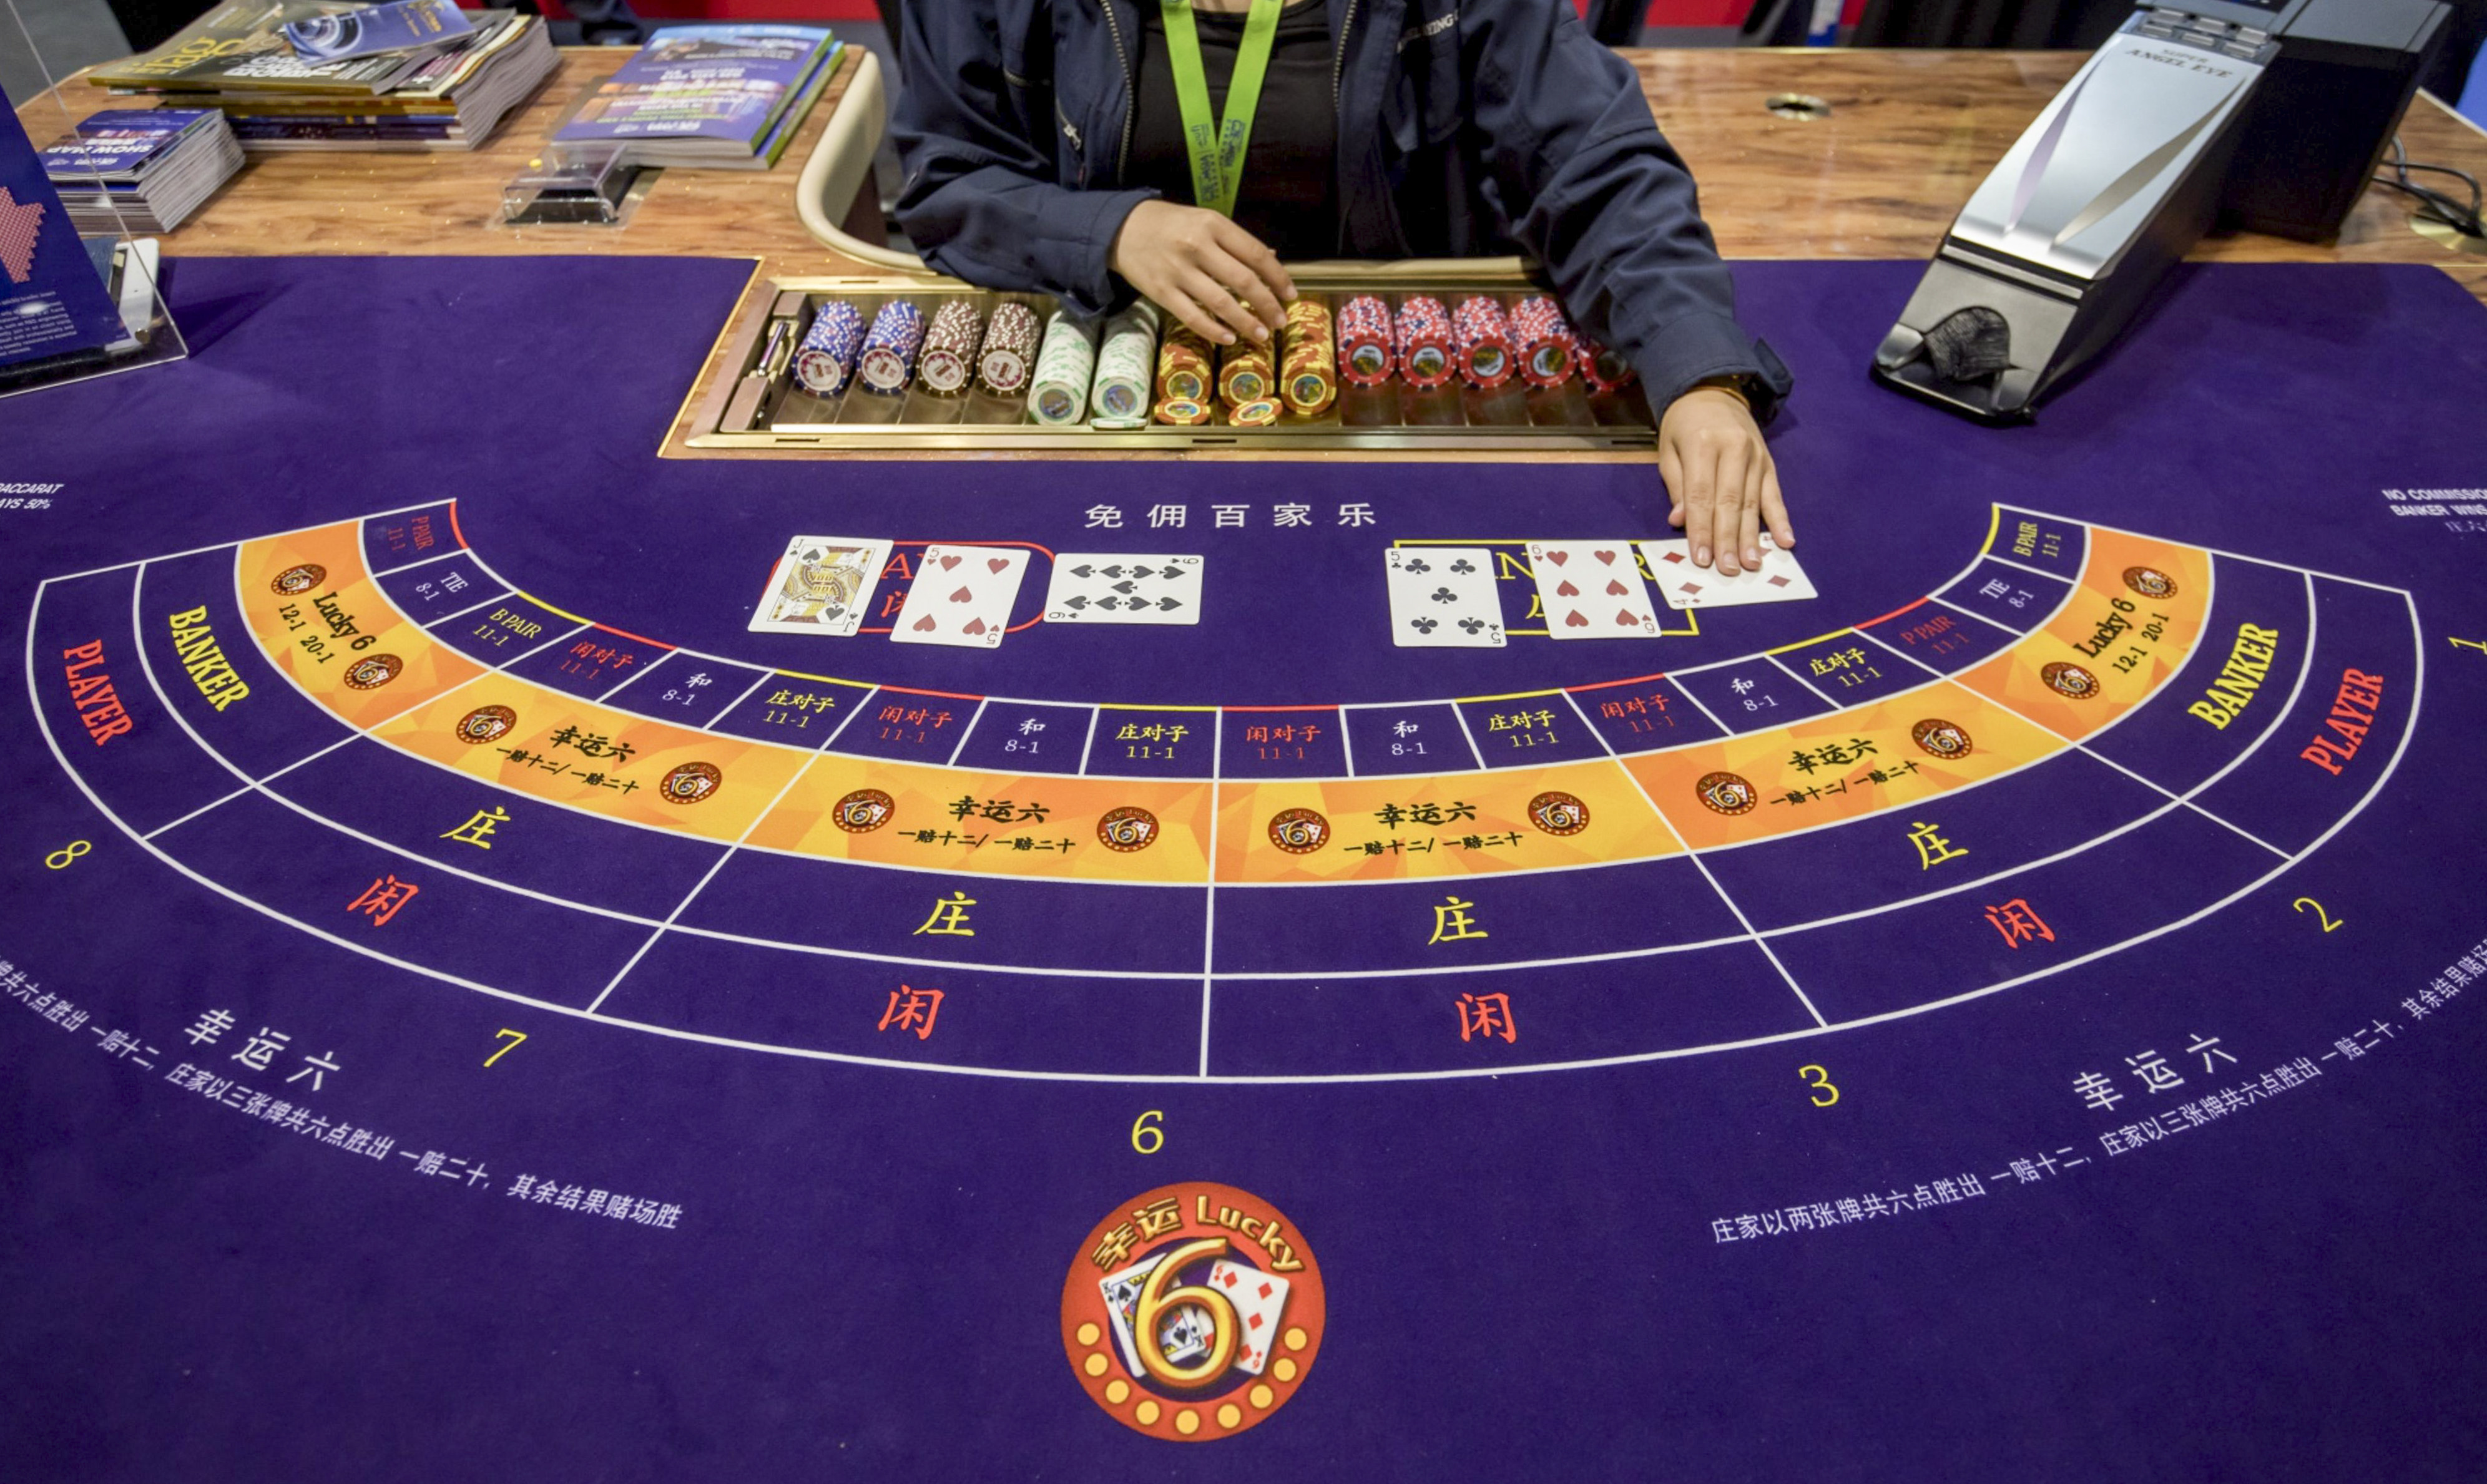 Cards are handled on a baccarat table during the Global Gaming Expo Asia (G2E Asia) in Macau, China, on Tuesday, May 21, 2019. The expo runs through May 23. Photographer: Paul Yeung/Bloomberg